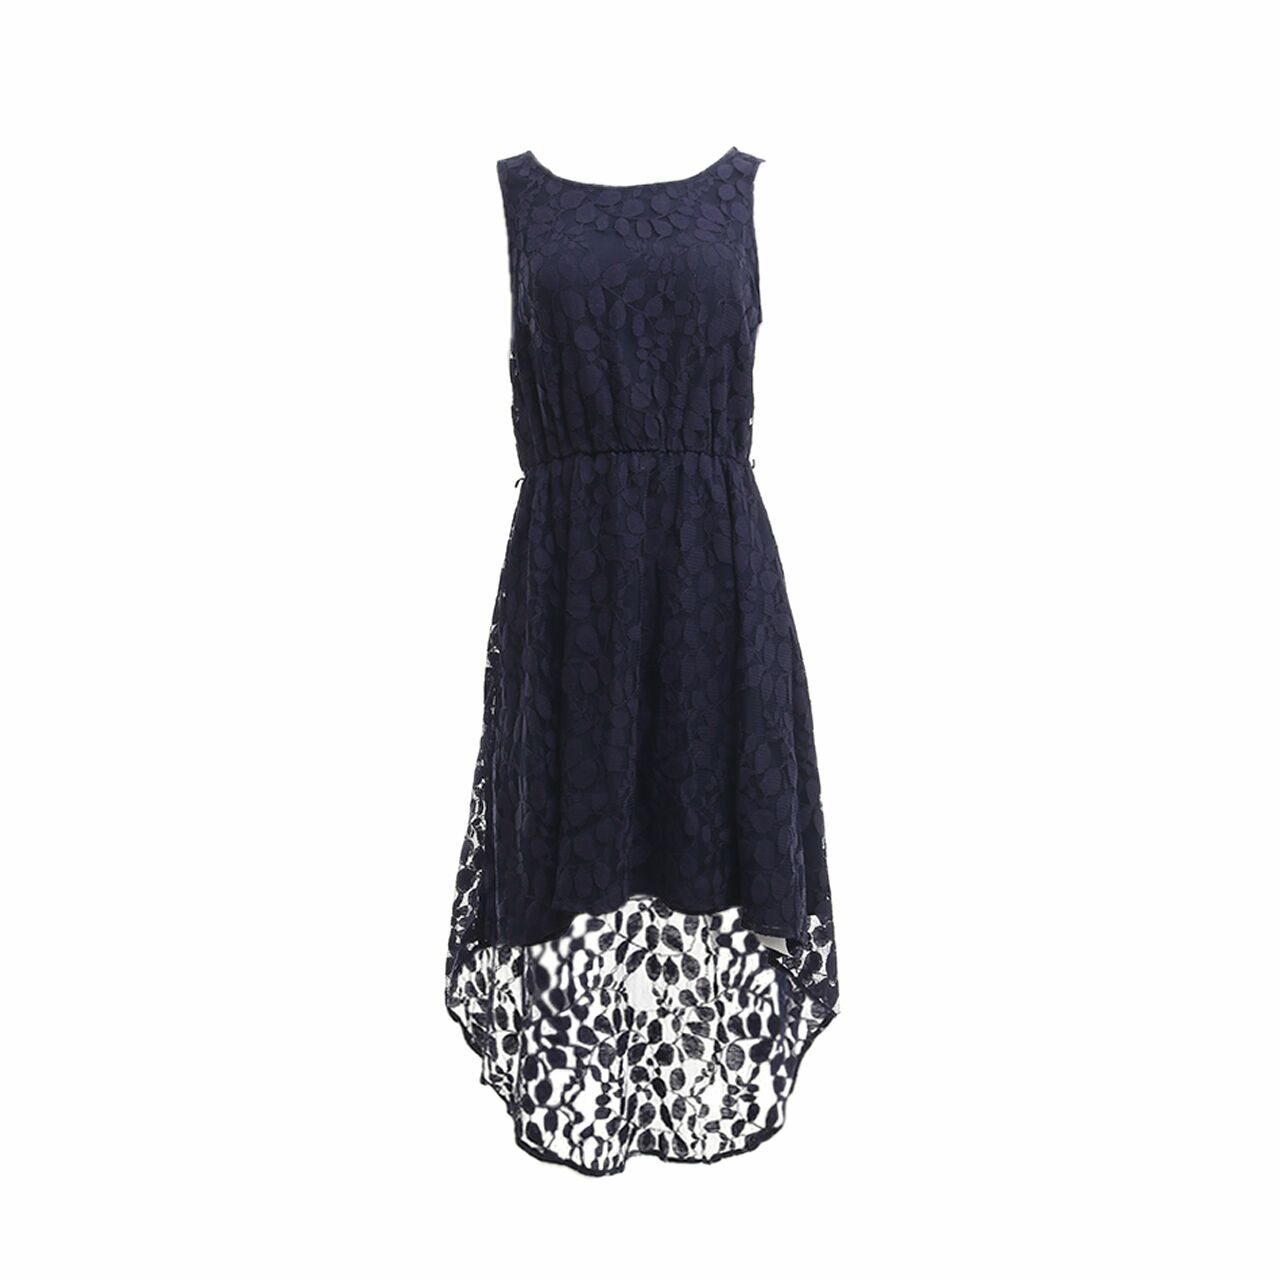 Forever 21 Navy Lace Mini Dress